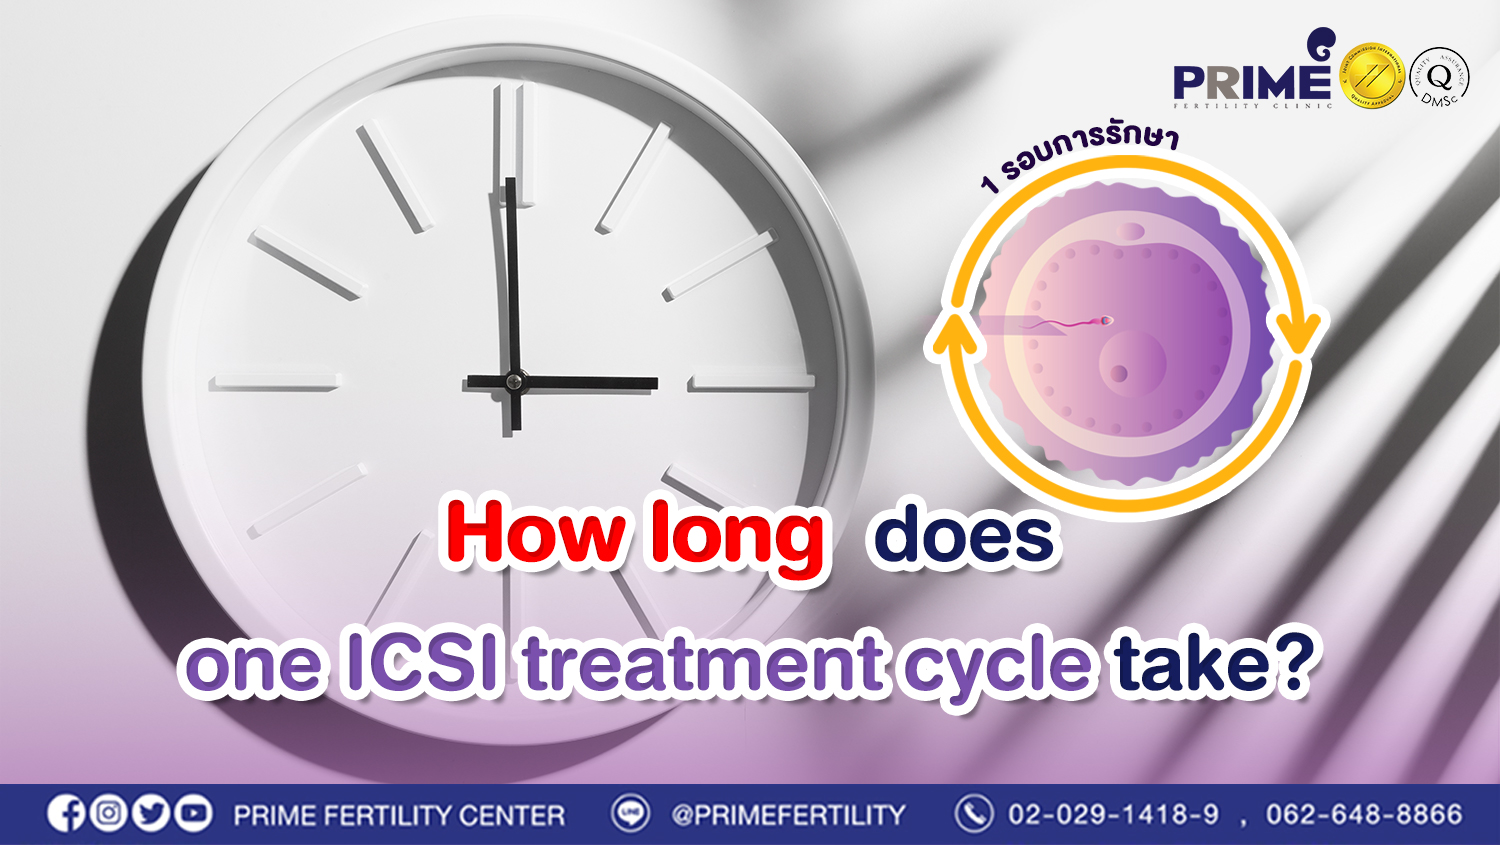 How long does one ICSI treatment cycle take?